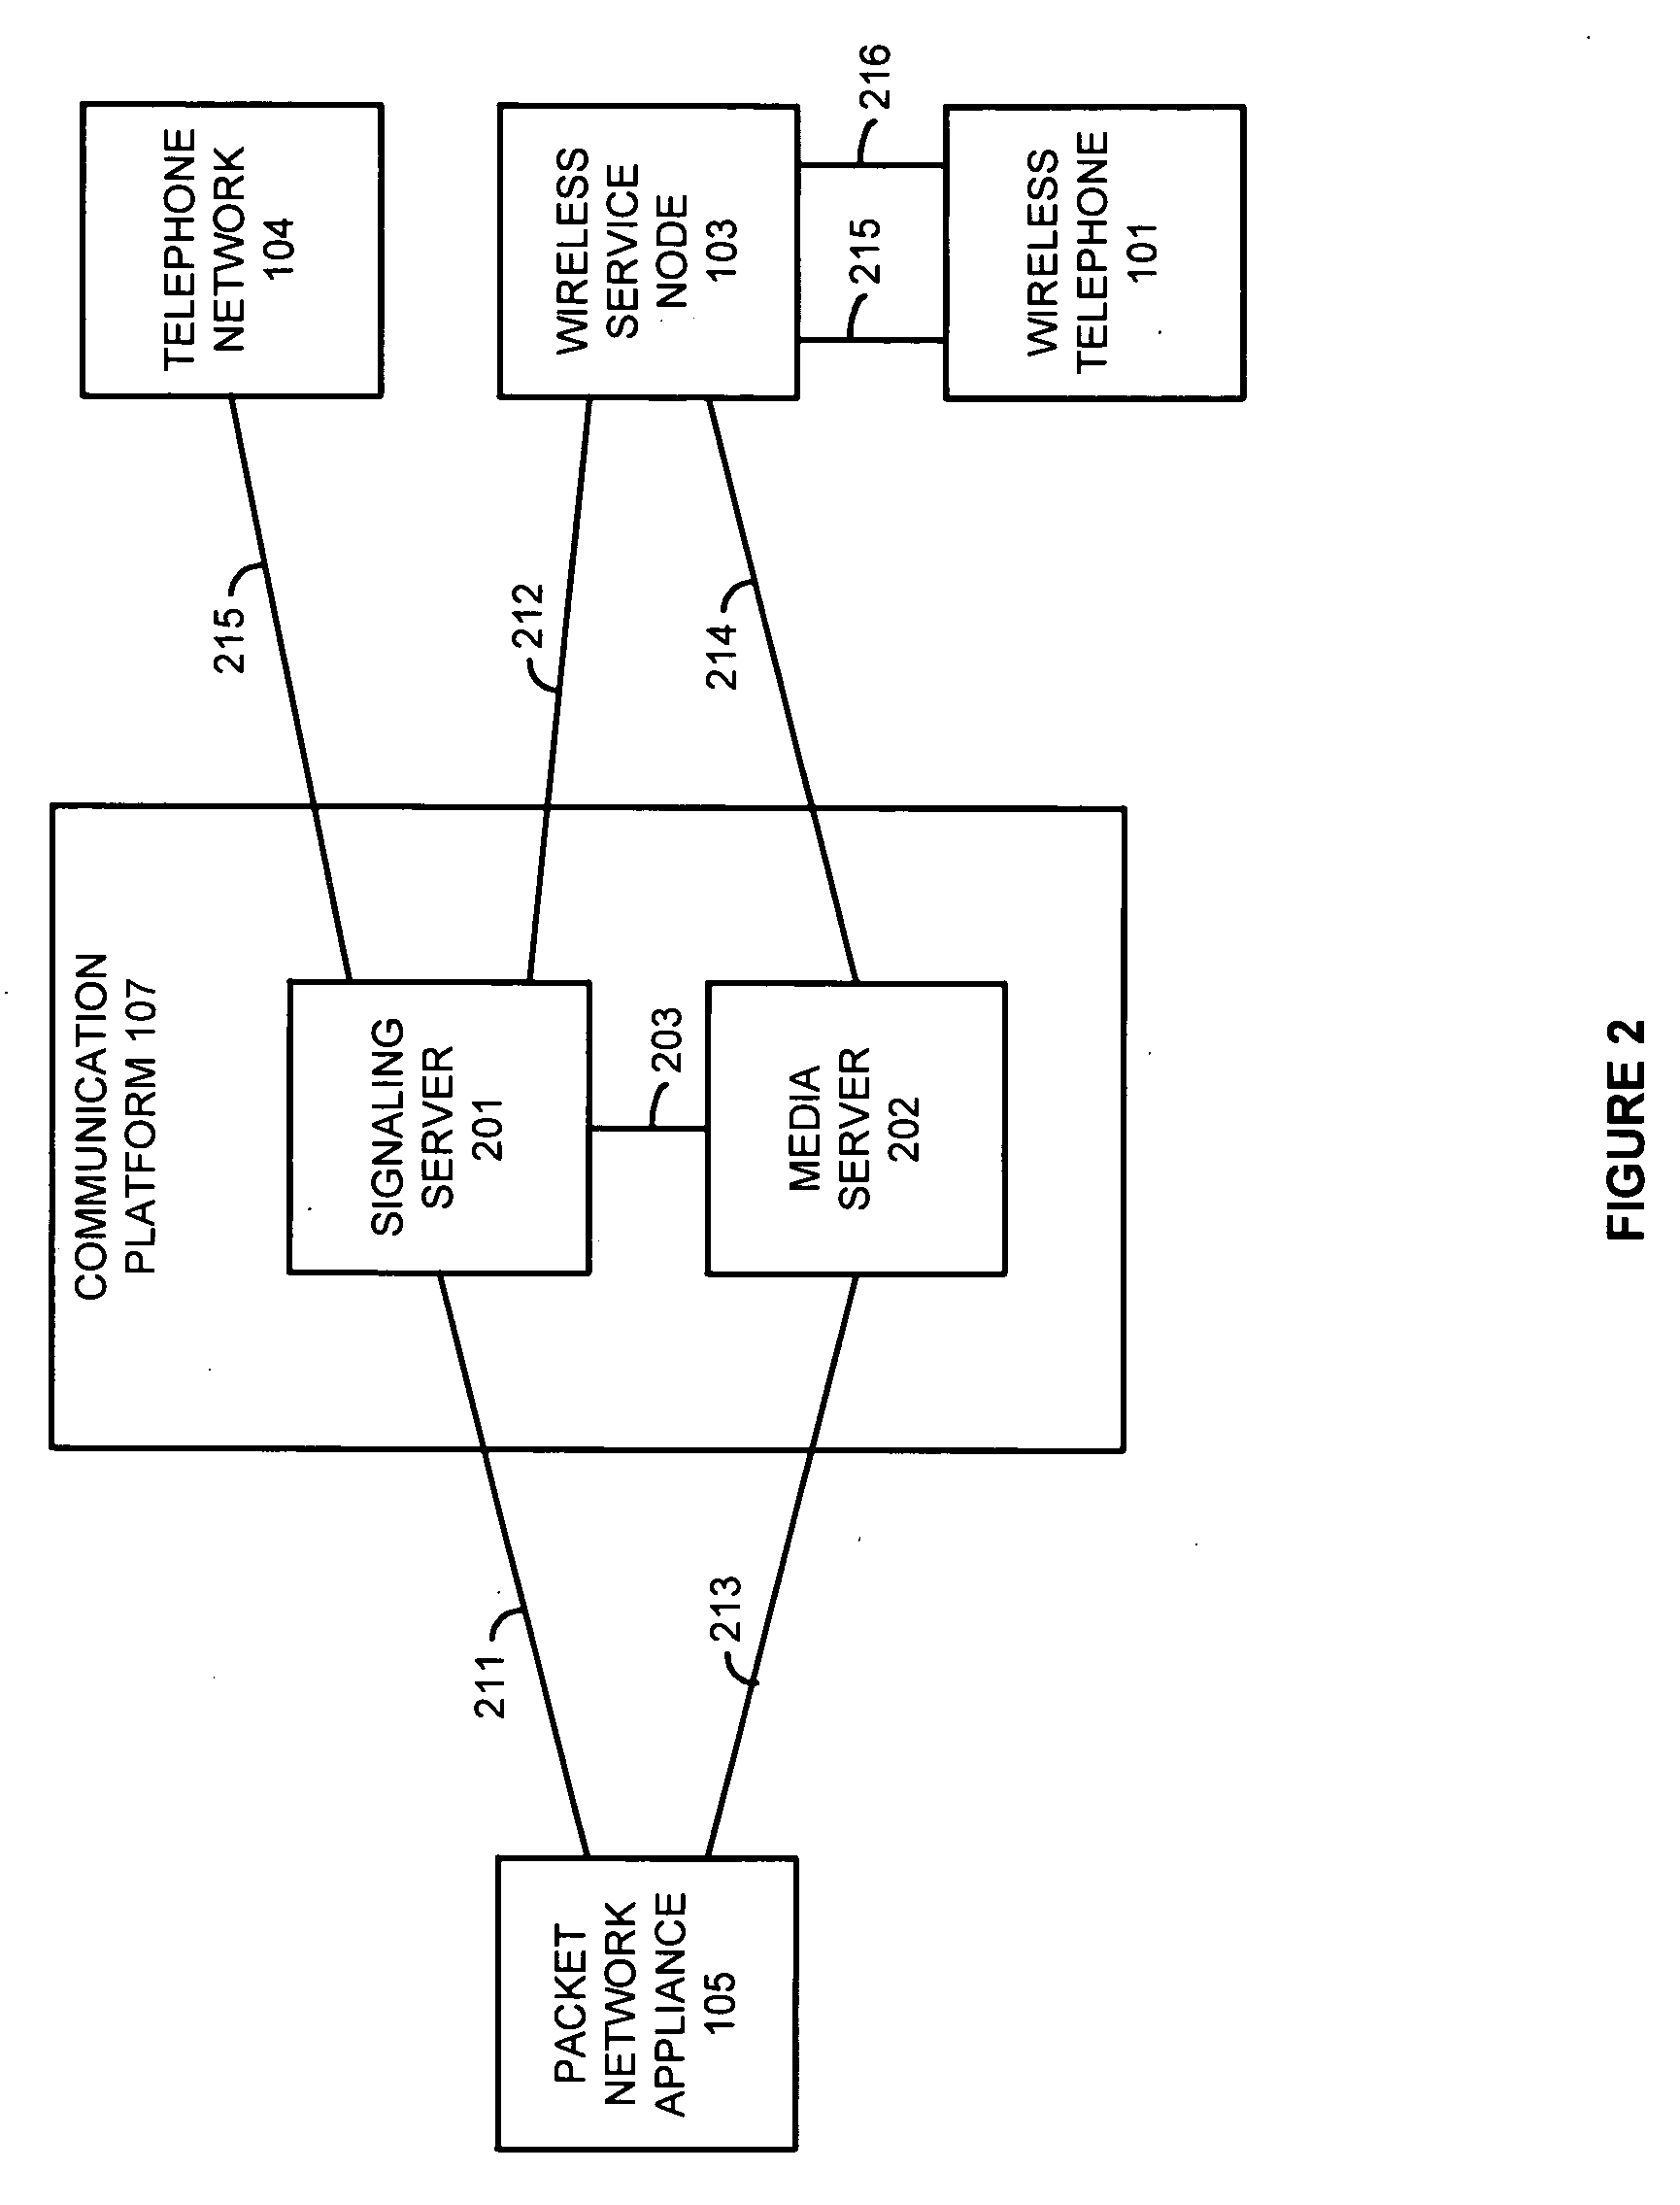 Communication system providing integrated wireless and packet communication services